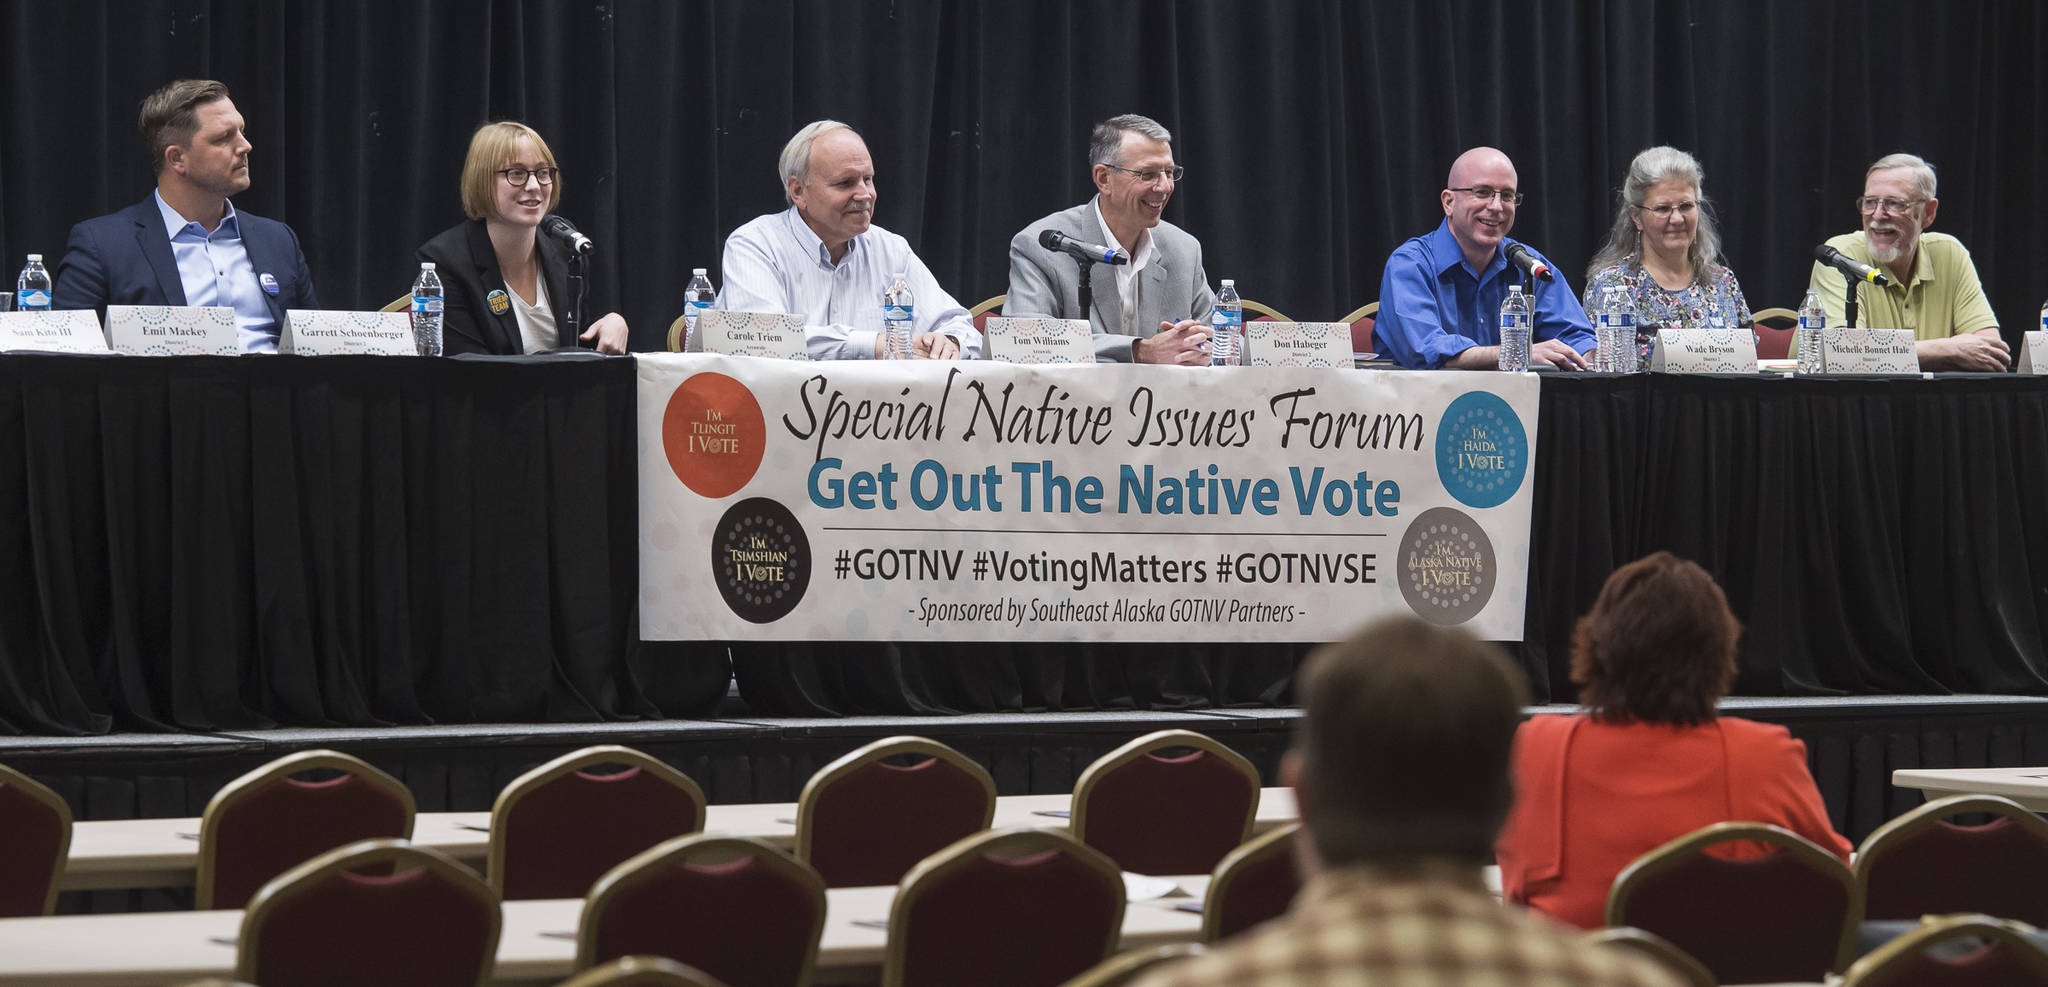 Assembly candidates answers questions during a Special Native Issues Forum at the Elizabeth Peratrovich Hall on Tuesday, Sept. 18, 2018. From left: Garrett Schoenberger, Carole Triem, Tom Williams, Don Habeger, Wade Bryson, Michelle Bonnet Hale and Loren Jones. (Michael Penn | Juneau Empire)